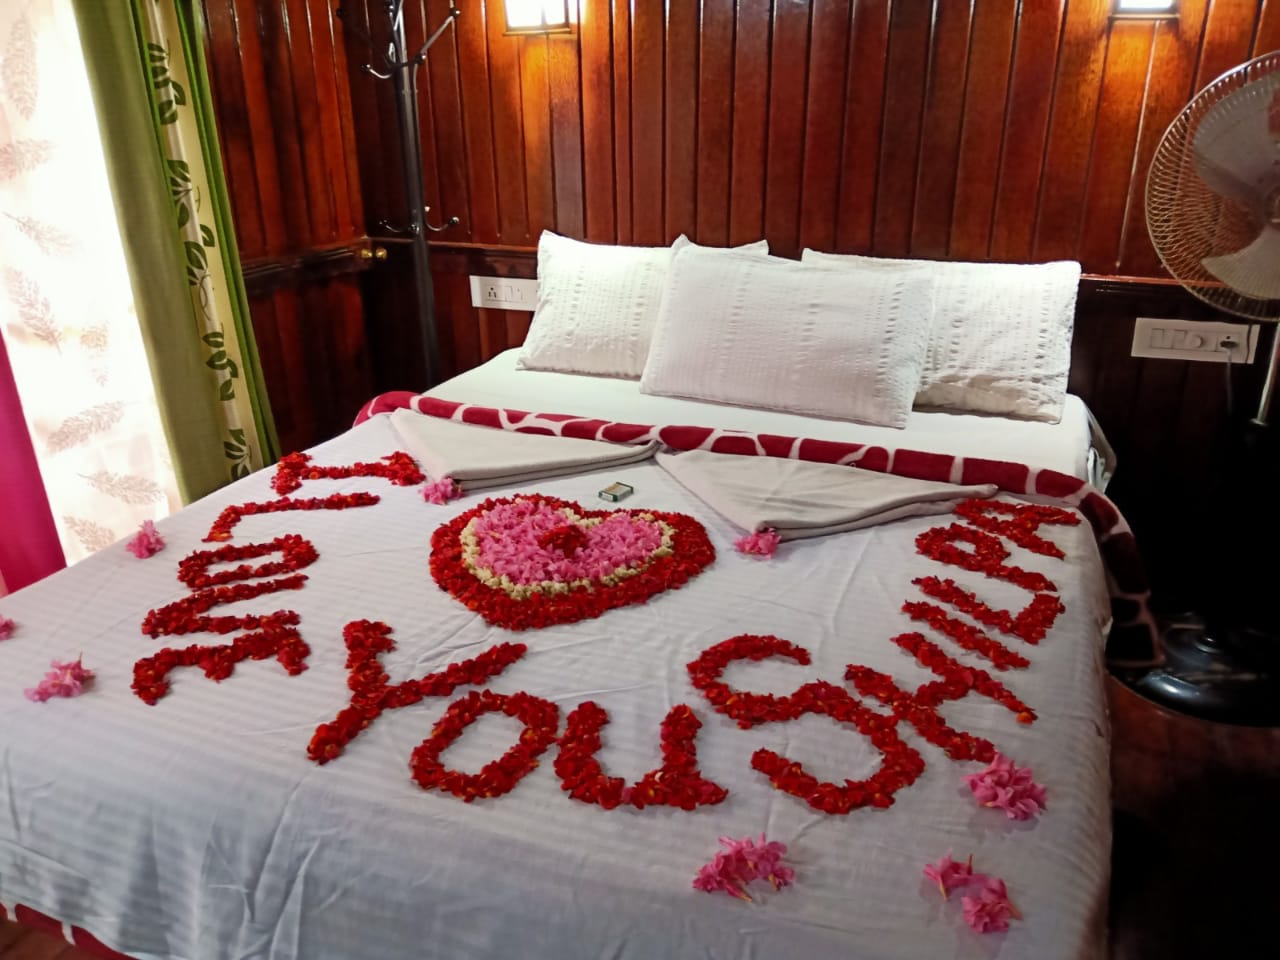 Honeymoon bed decoration with swan towel with rose flower decoration in  bedroom interior - Vintage..., Stock Photo, Picture And Low Budget Royalty  Free Image. Pic. ESY-033551093 | agefotostock